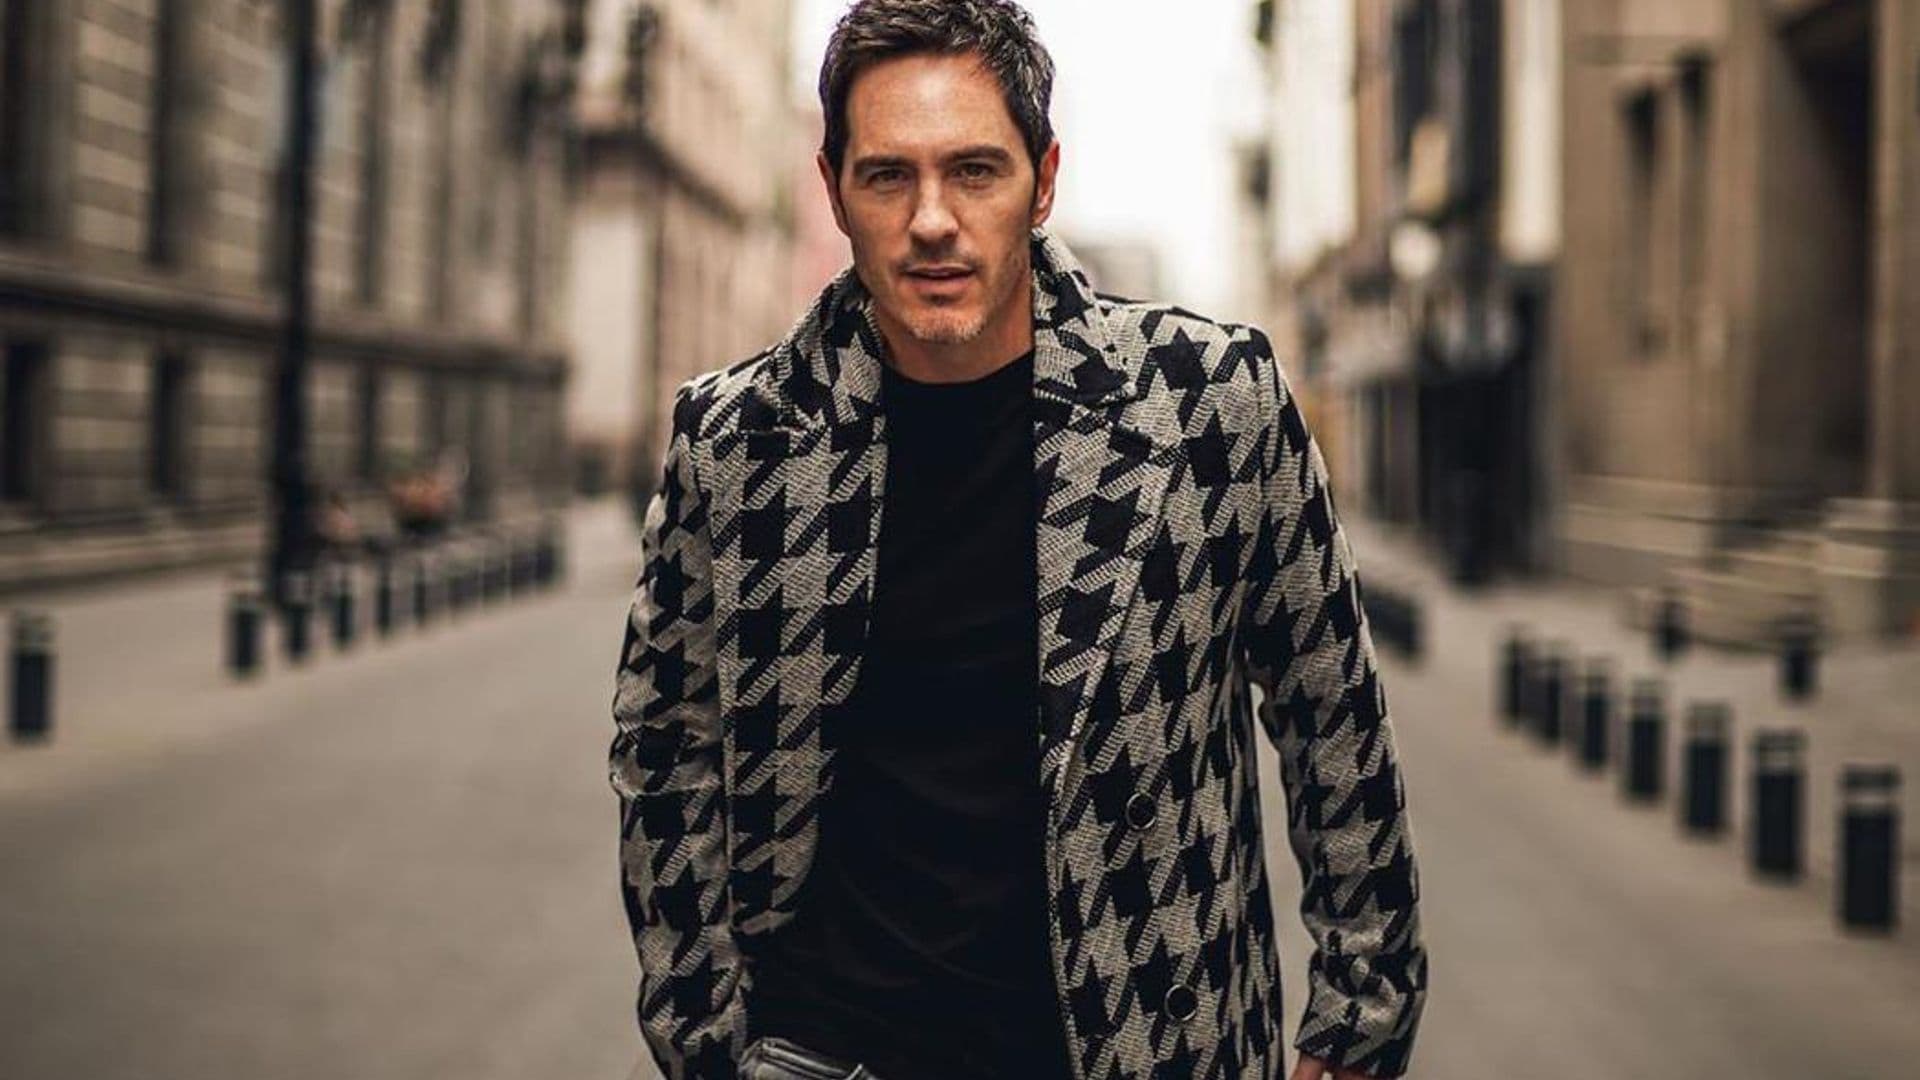 Mauricio Ochmann reveals what he likes most about Mexico City